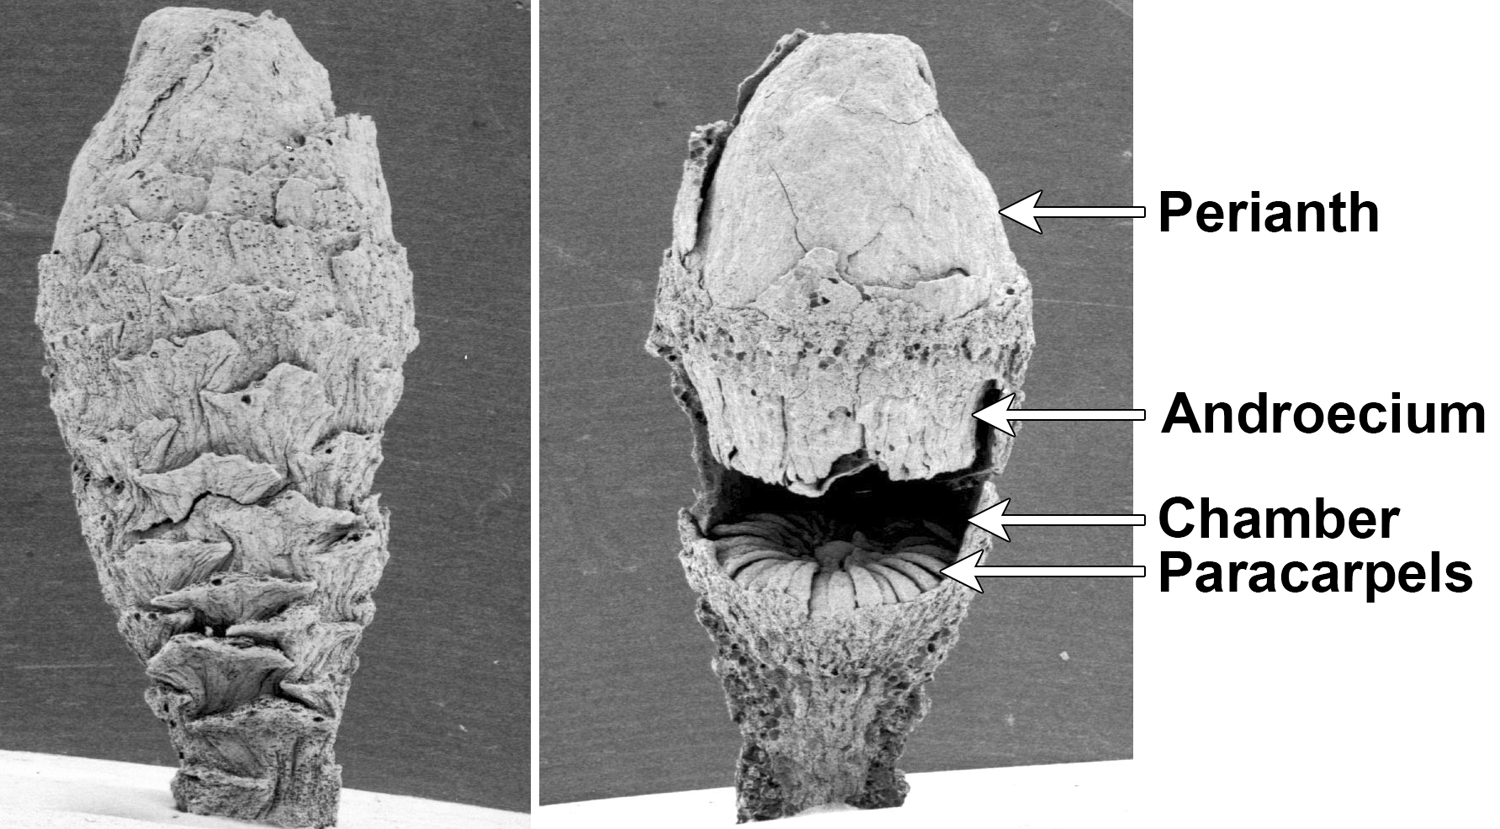 2-Panel figure. Panel 1. Bud of fossil Microvictoria flower. Panel 2. Same bud, partially dissected.